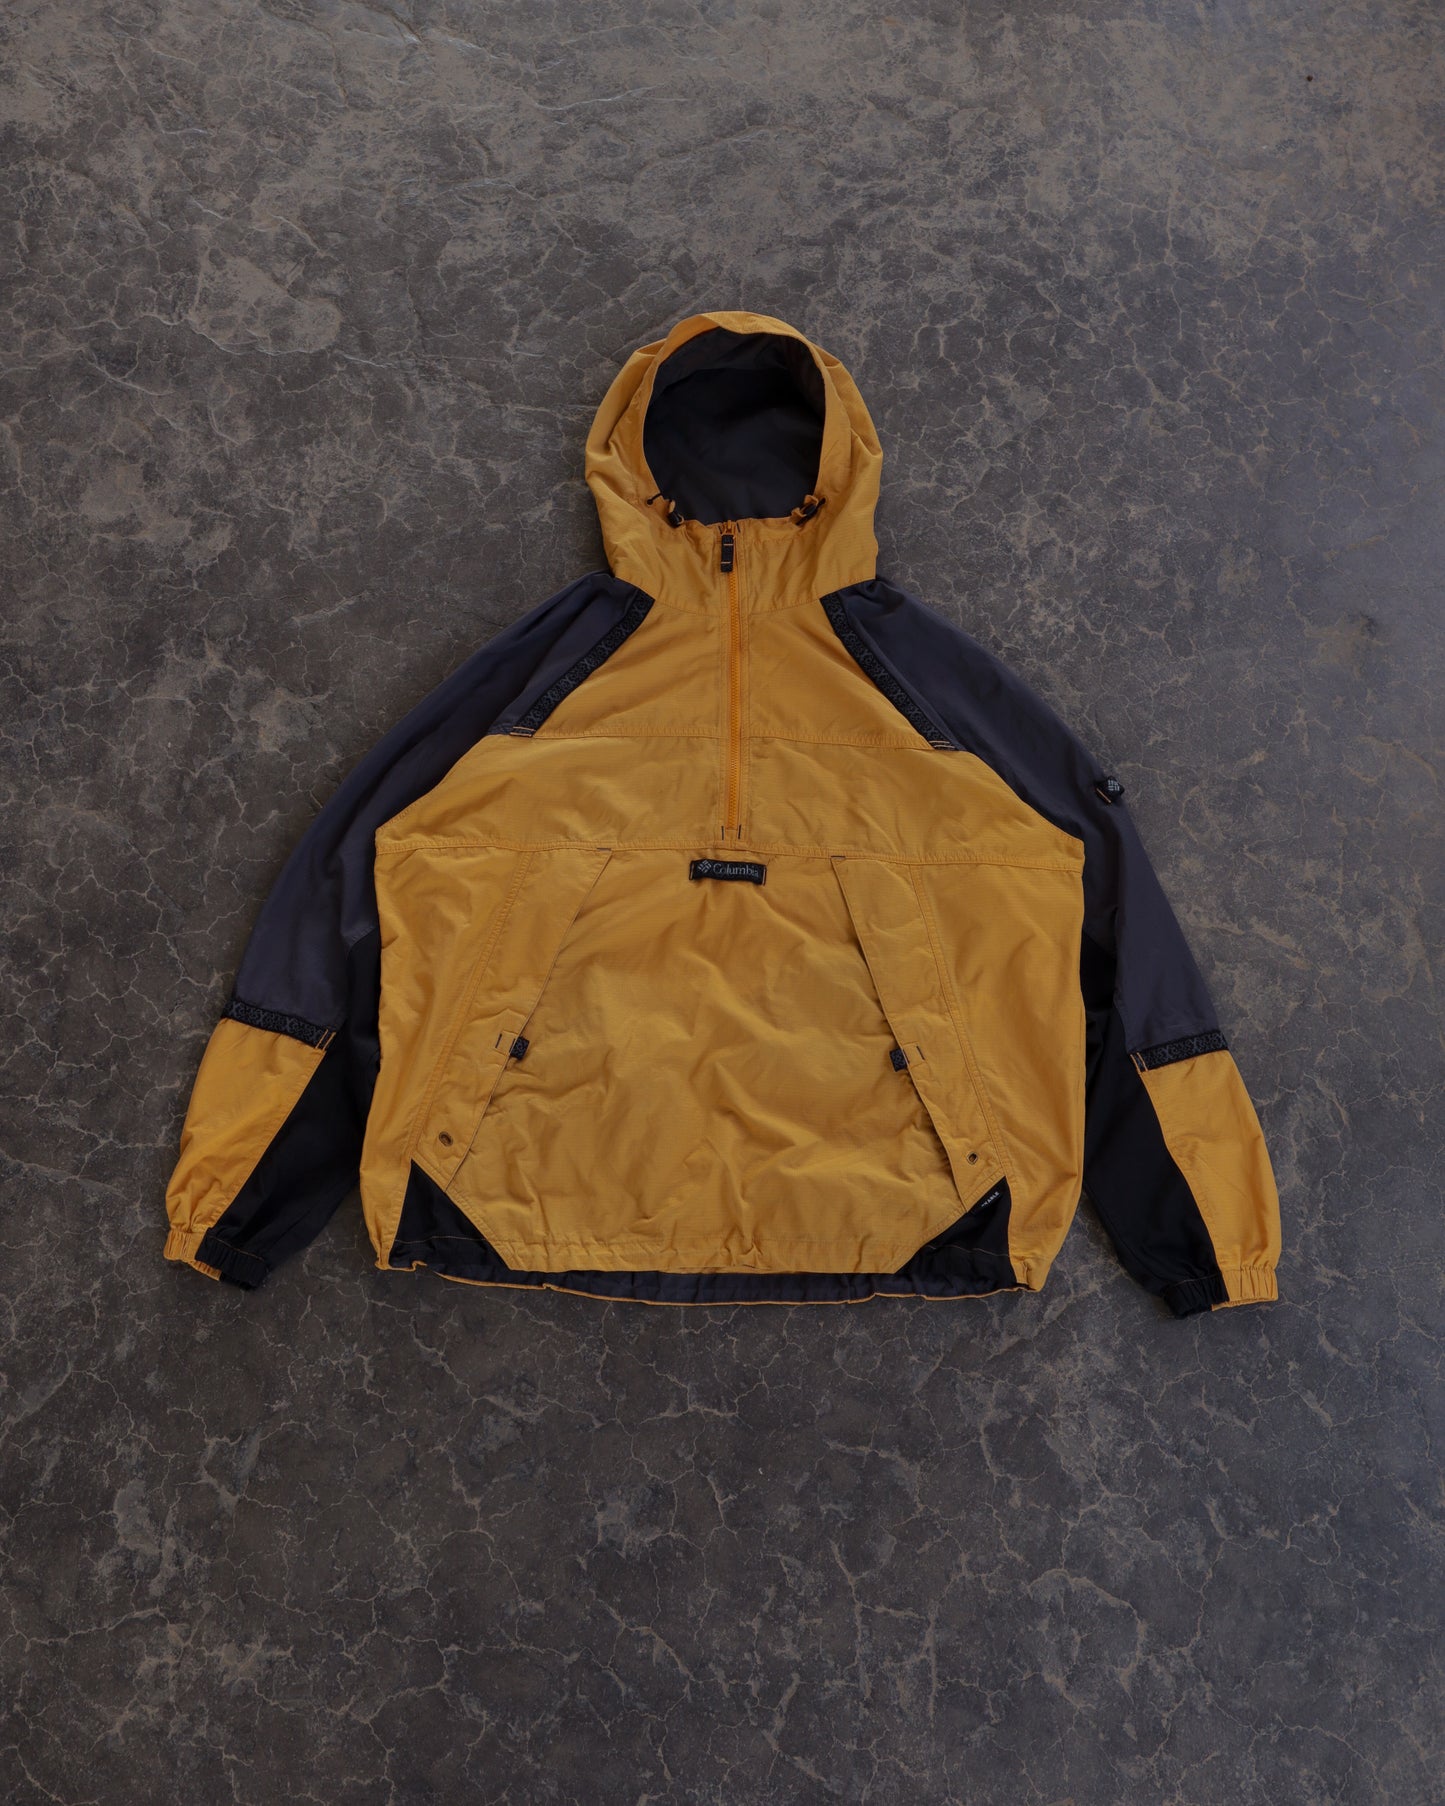 90s Columbia Packable Yellow Jacket - XL